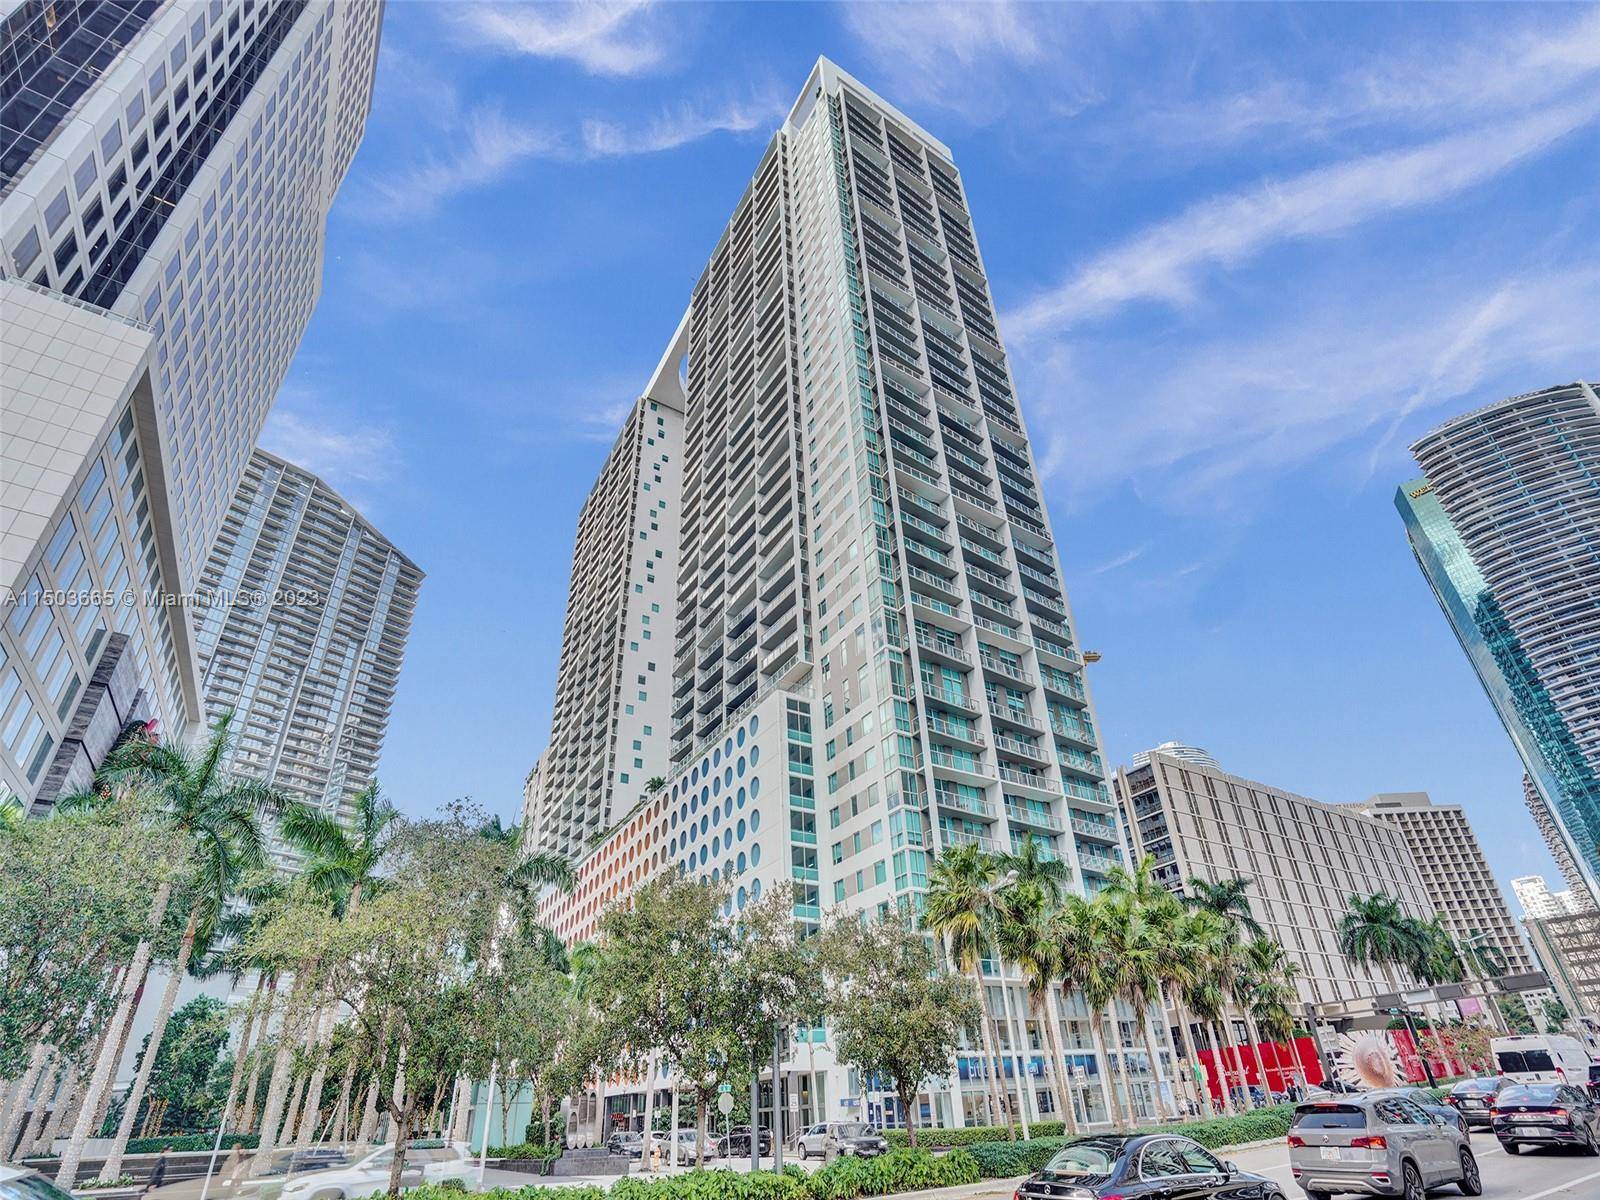 Beautiful 1 bedroom, 1 bathroom residence featuring stunning city and water views, centrally located in the heart of Brickell.